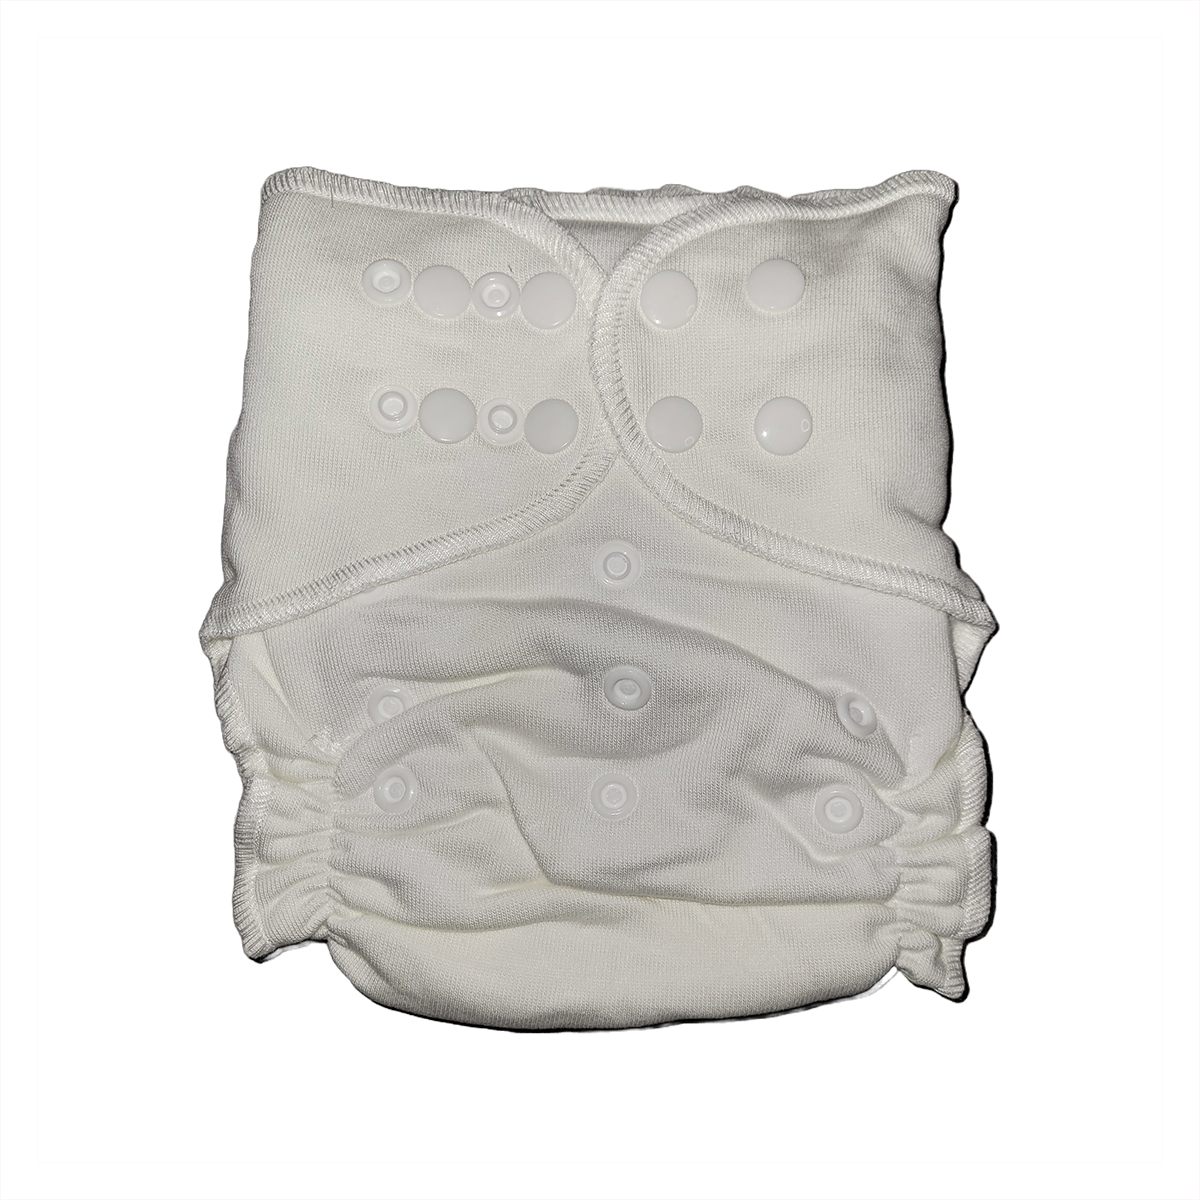 Bamboo Cotton midsize™ fitted diaper - Calcite